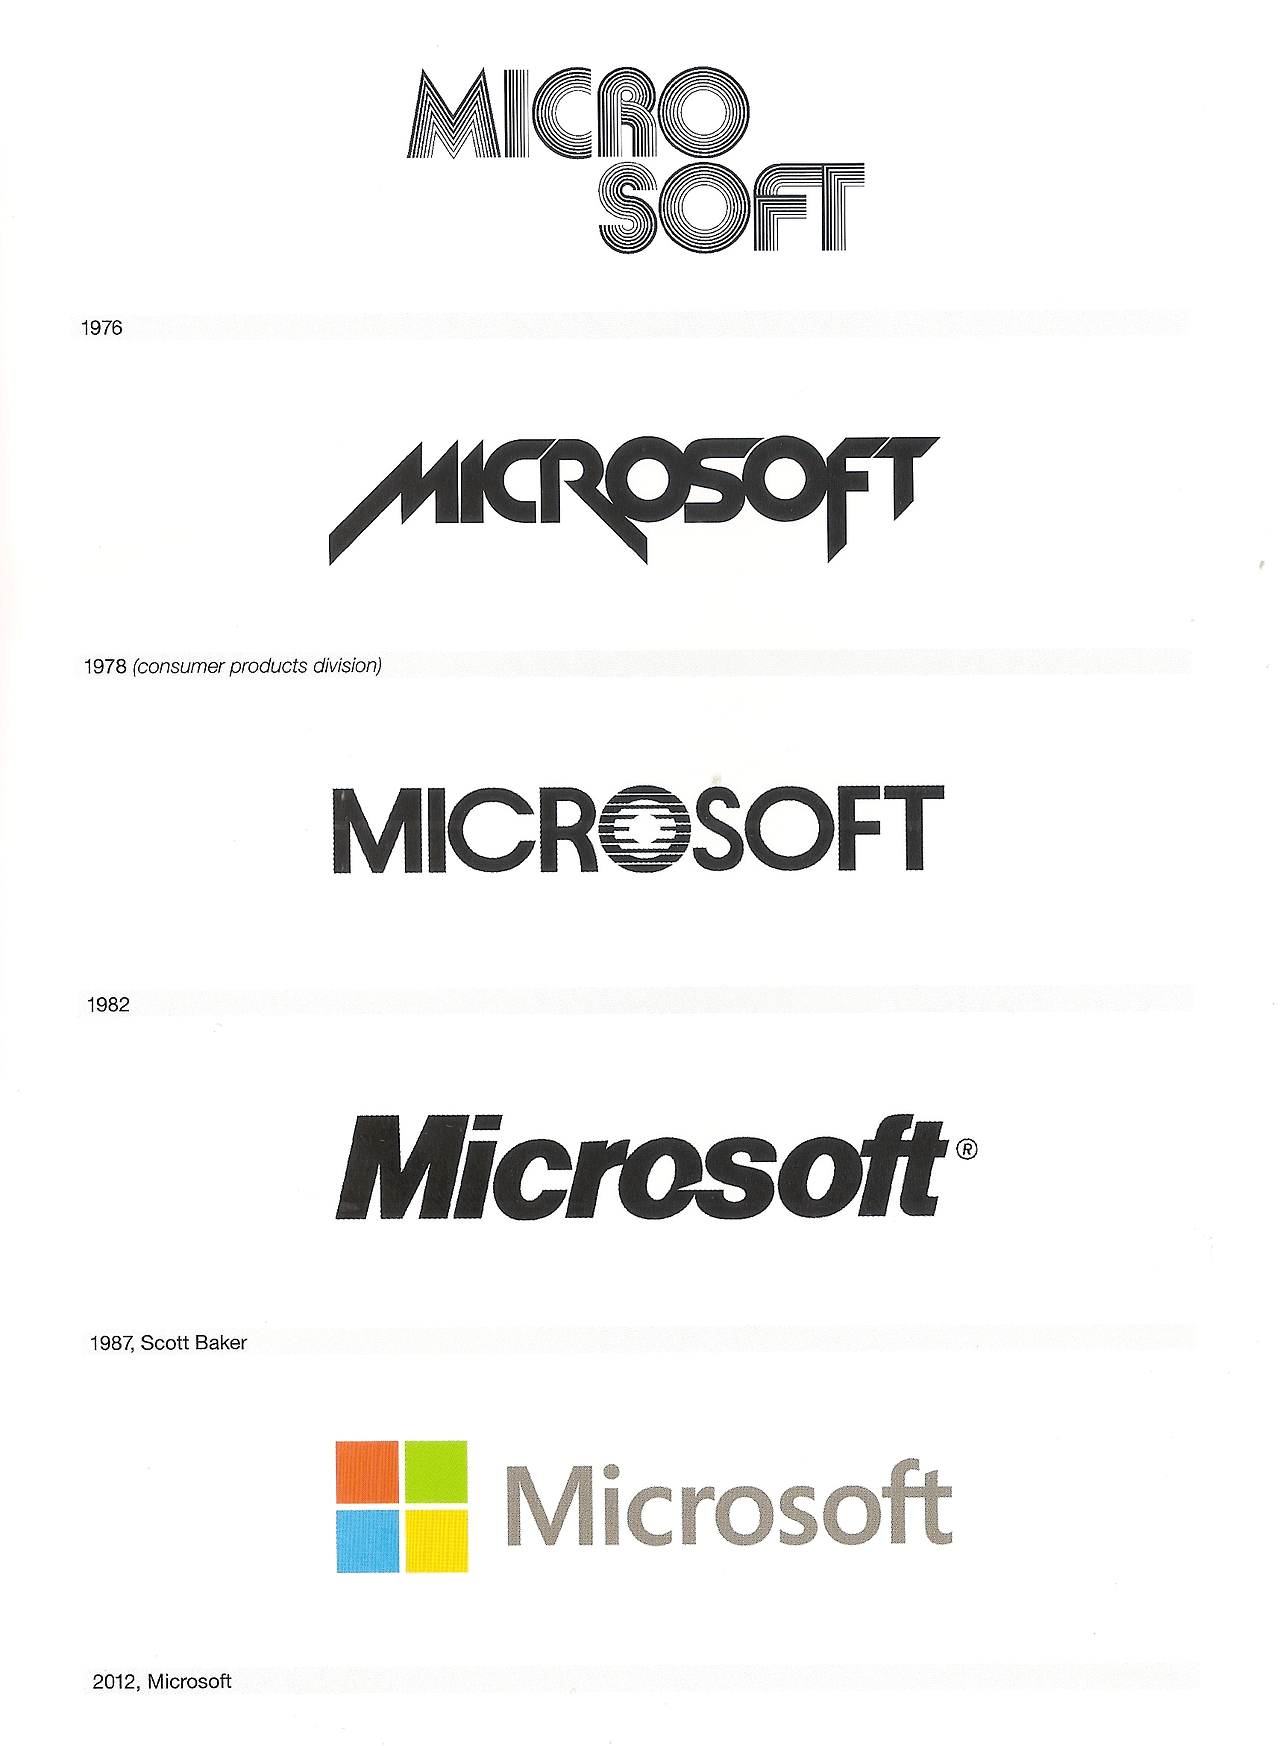 Real Microsoft Logo - The Microsoft logo throughout the years. My brother had Microsoft